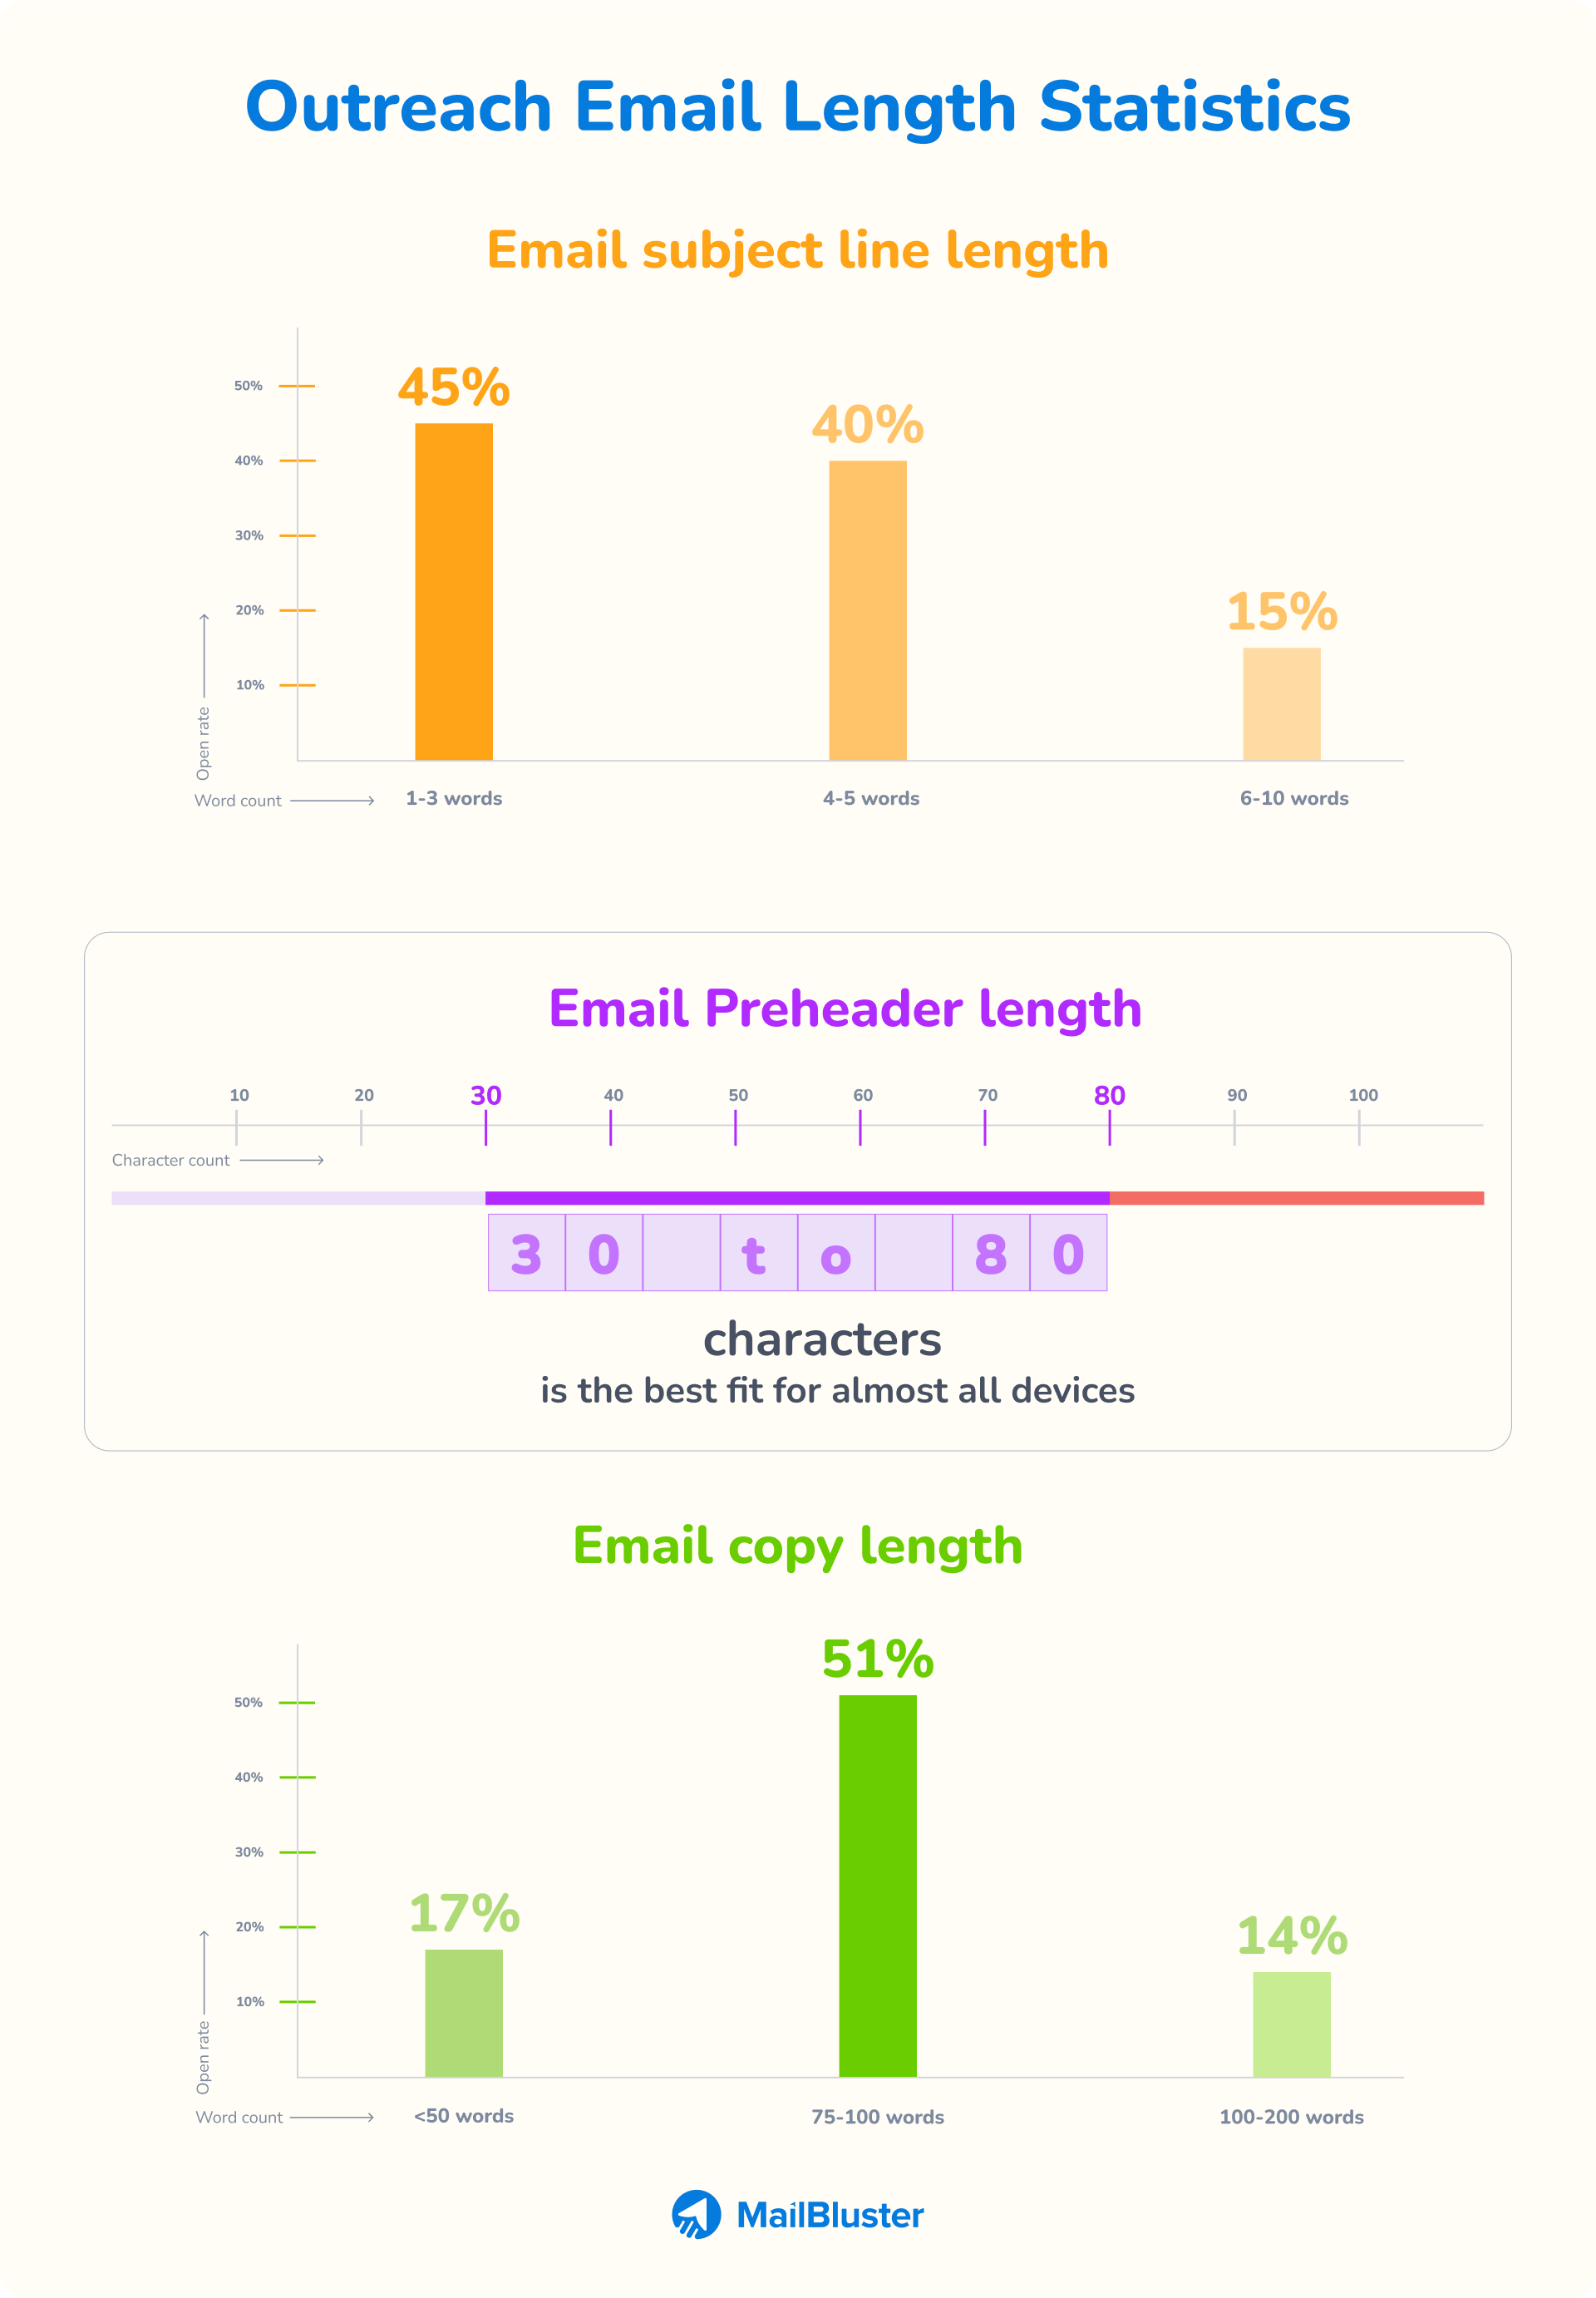 Statistics on how many words is too long for an outreach email